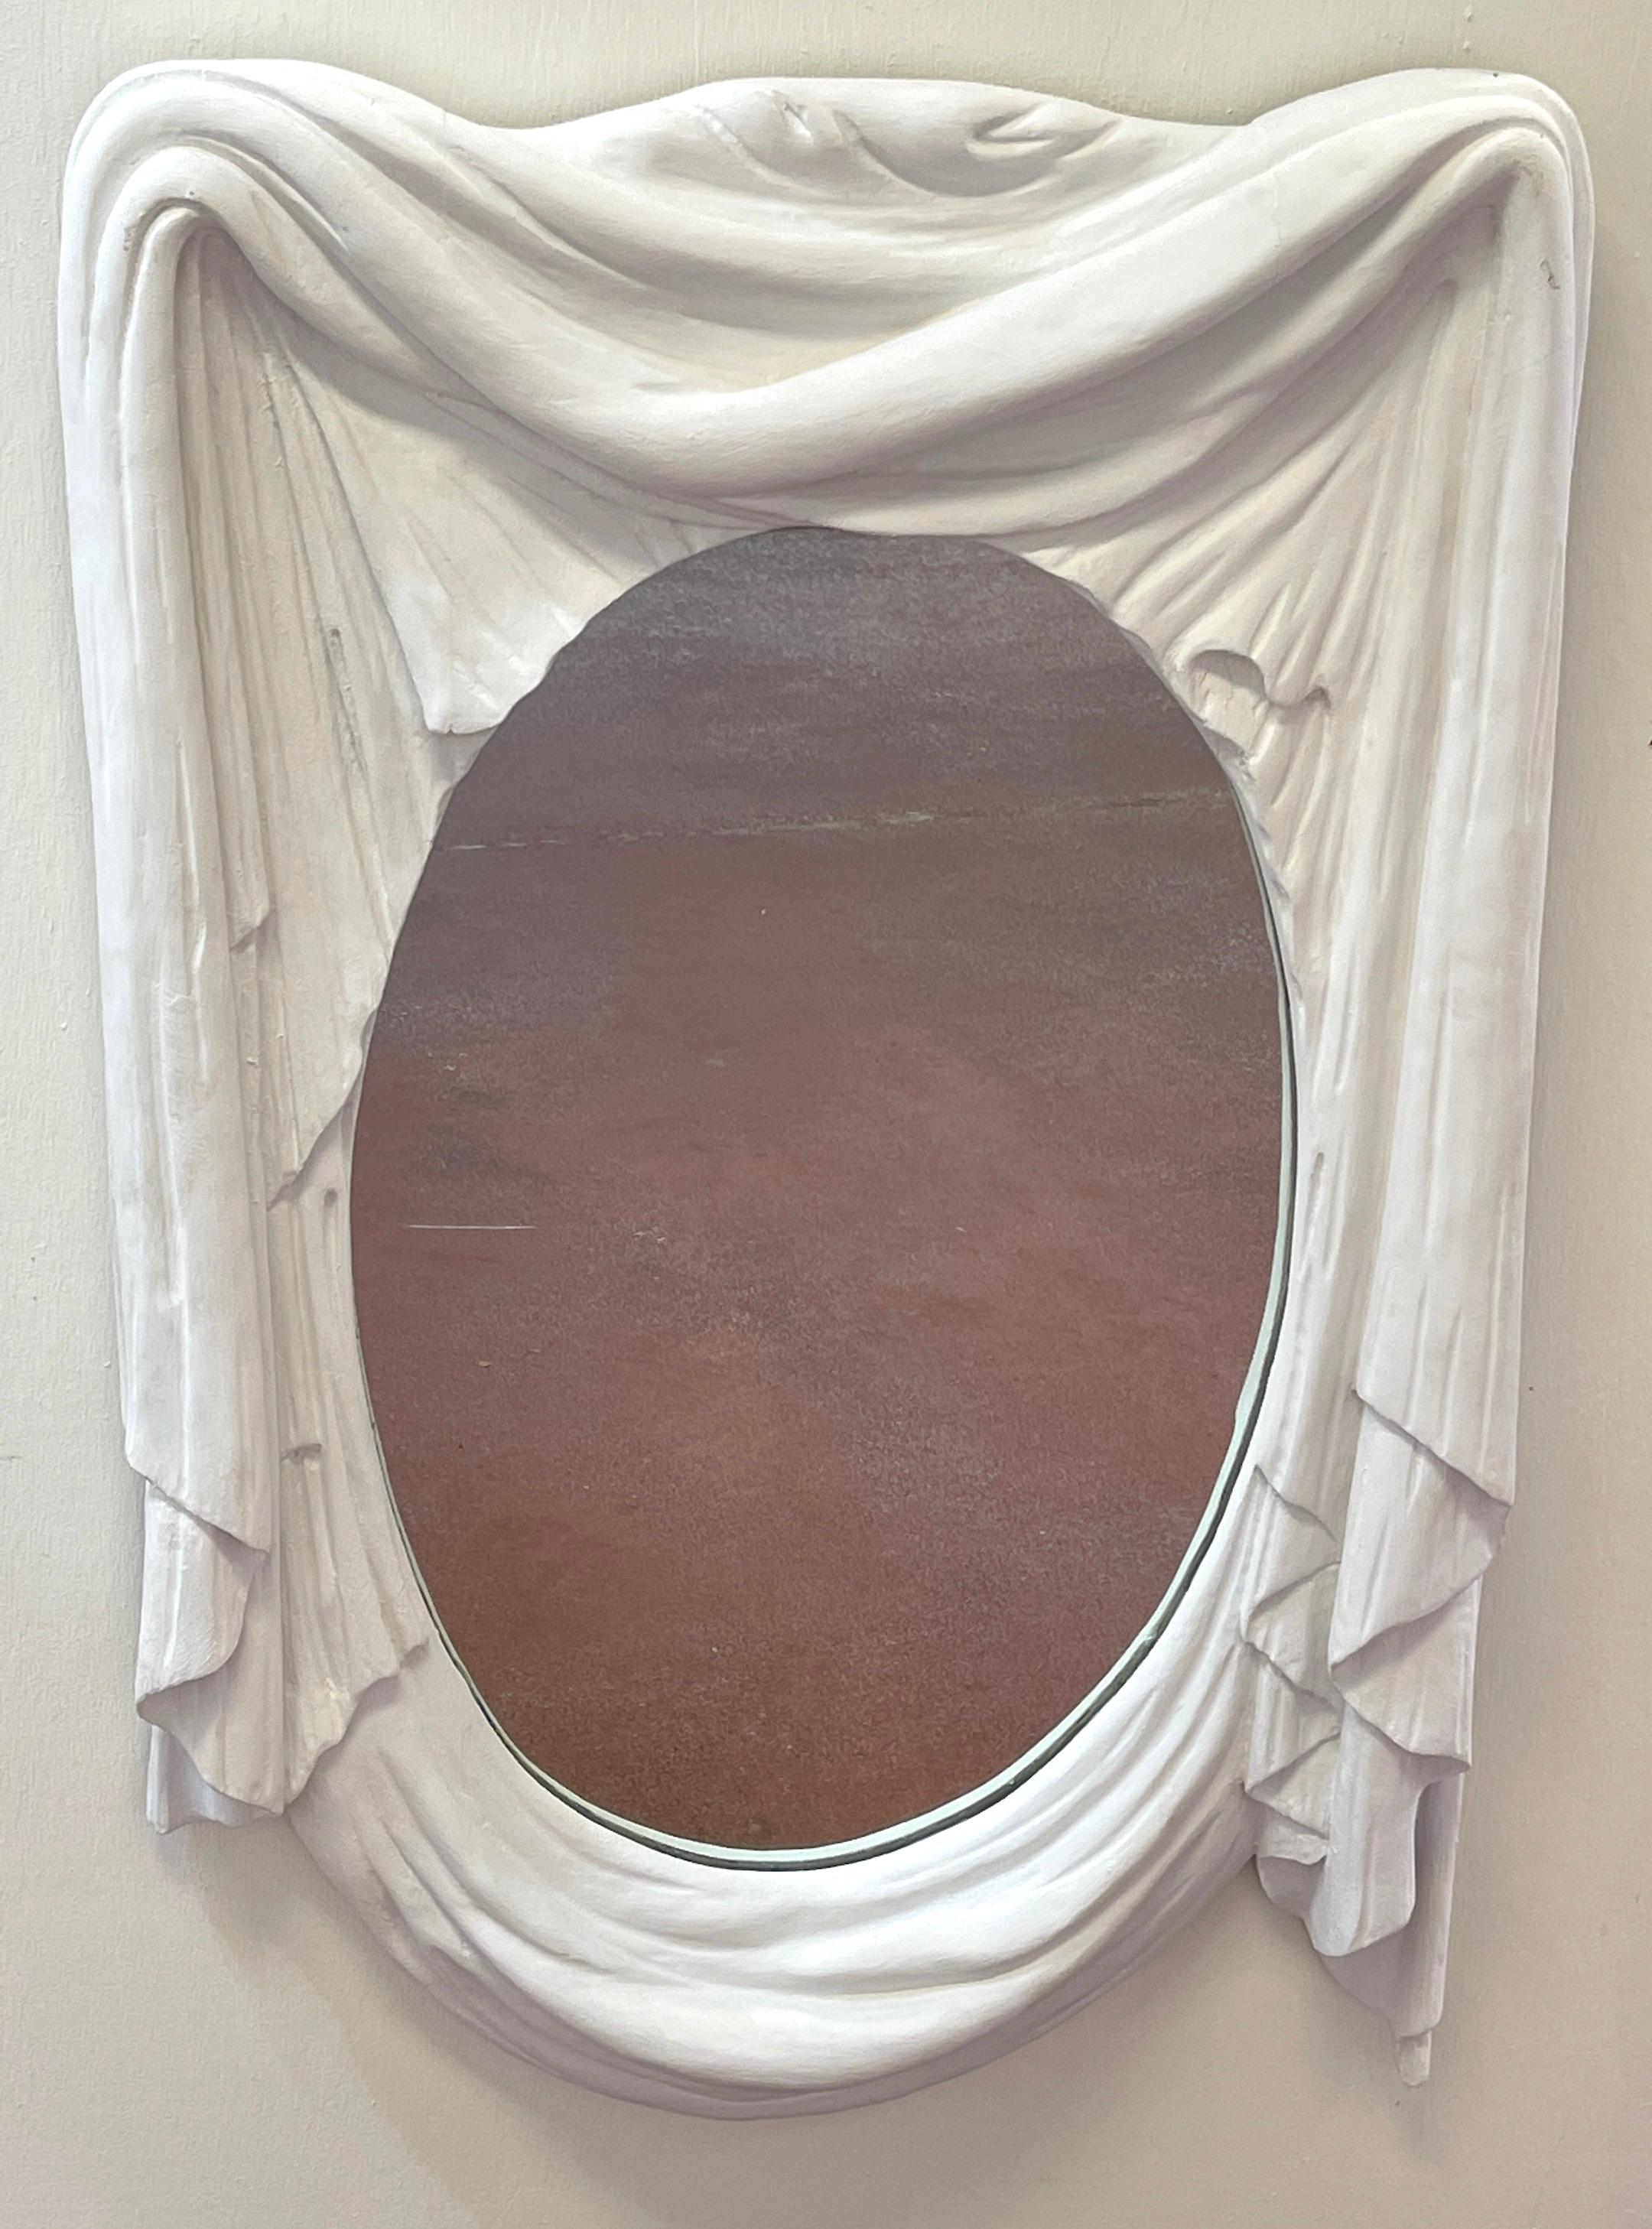 Italian modern white lacquered carved wood draped mirror
Beautifully executed, realistically carved and lacquered in white. Influences of John Dickenson.
The inset mirror measures 19